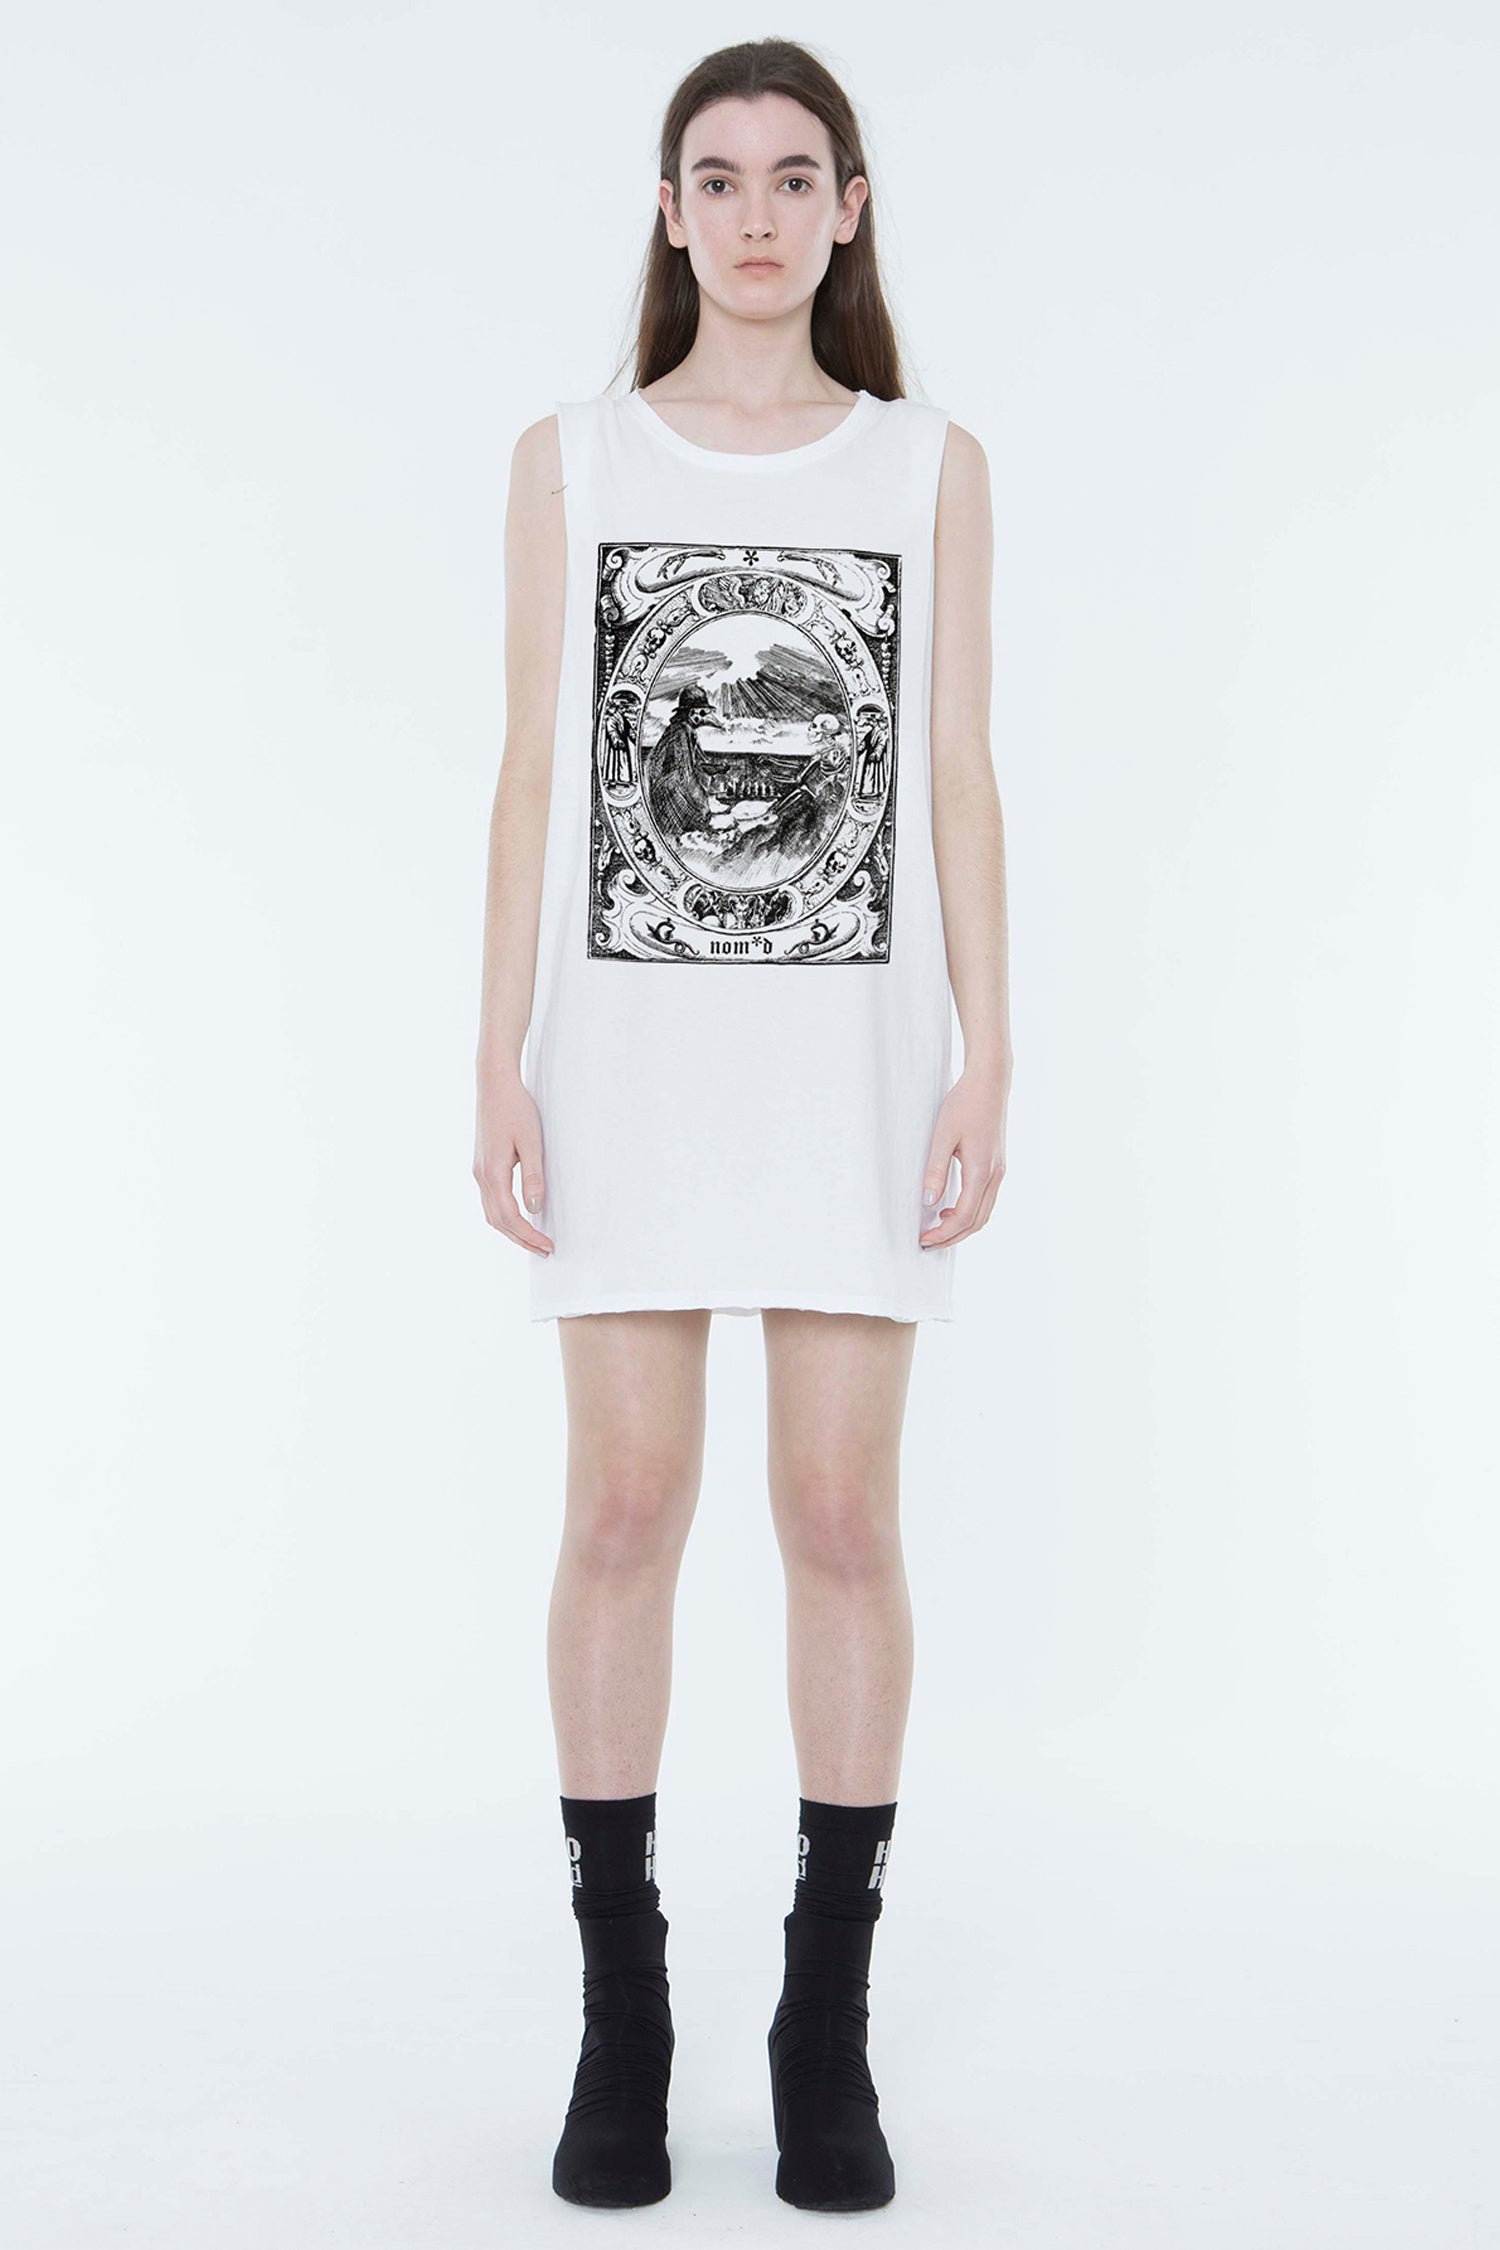 CHECKMATE TANK DRESS IN WHITE WITH BLACK PRINT, S23